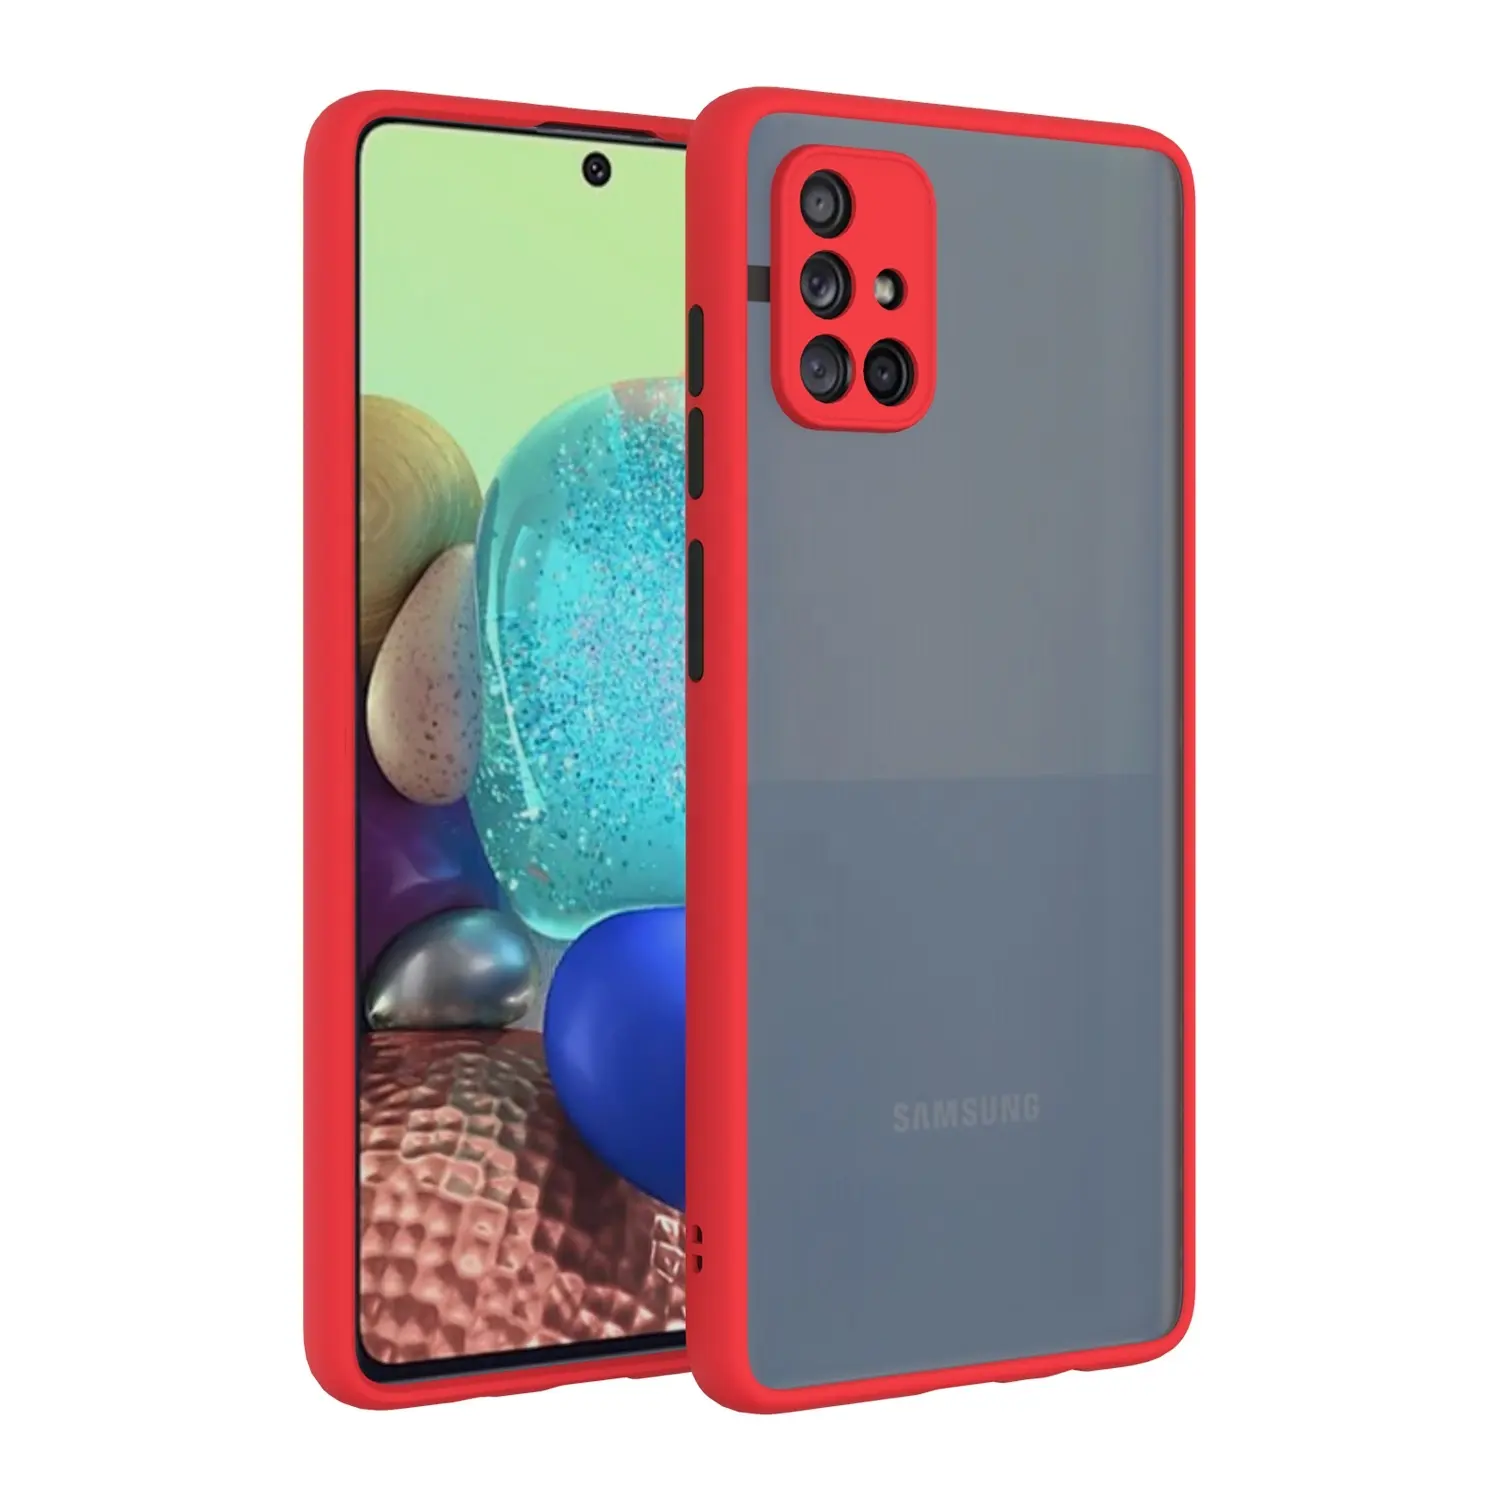 Phone Case Factory Translucent Matte Mobail Cover Hard PC Coque De TelephoneためSamsung Galaxy A71 S20 Ultra Note 10 A51 A01 20